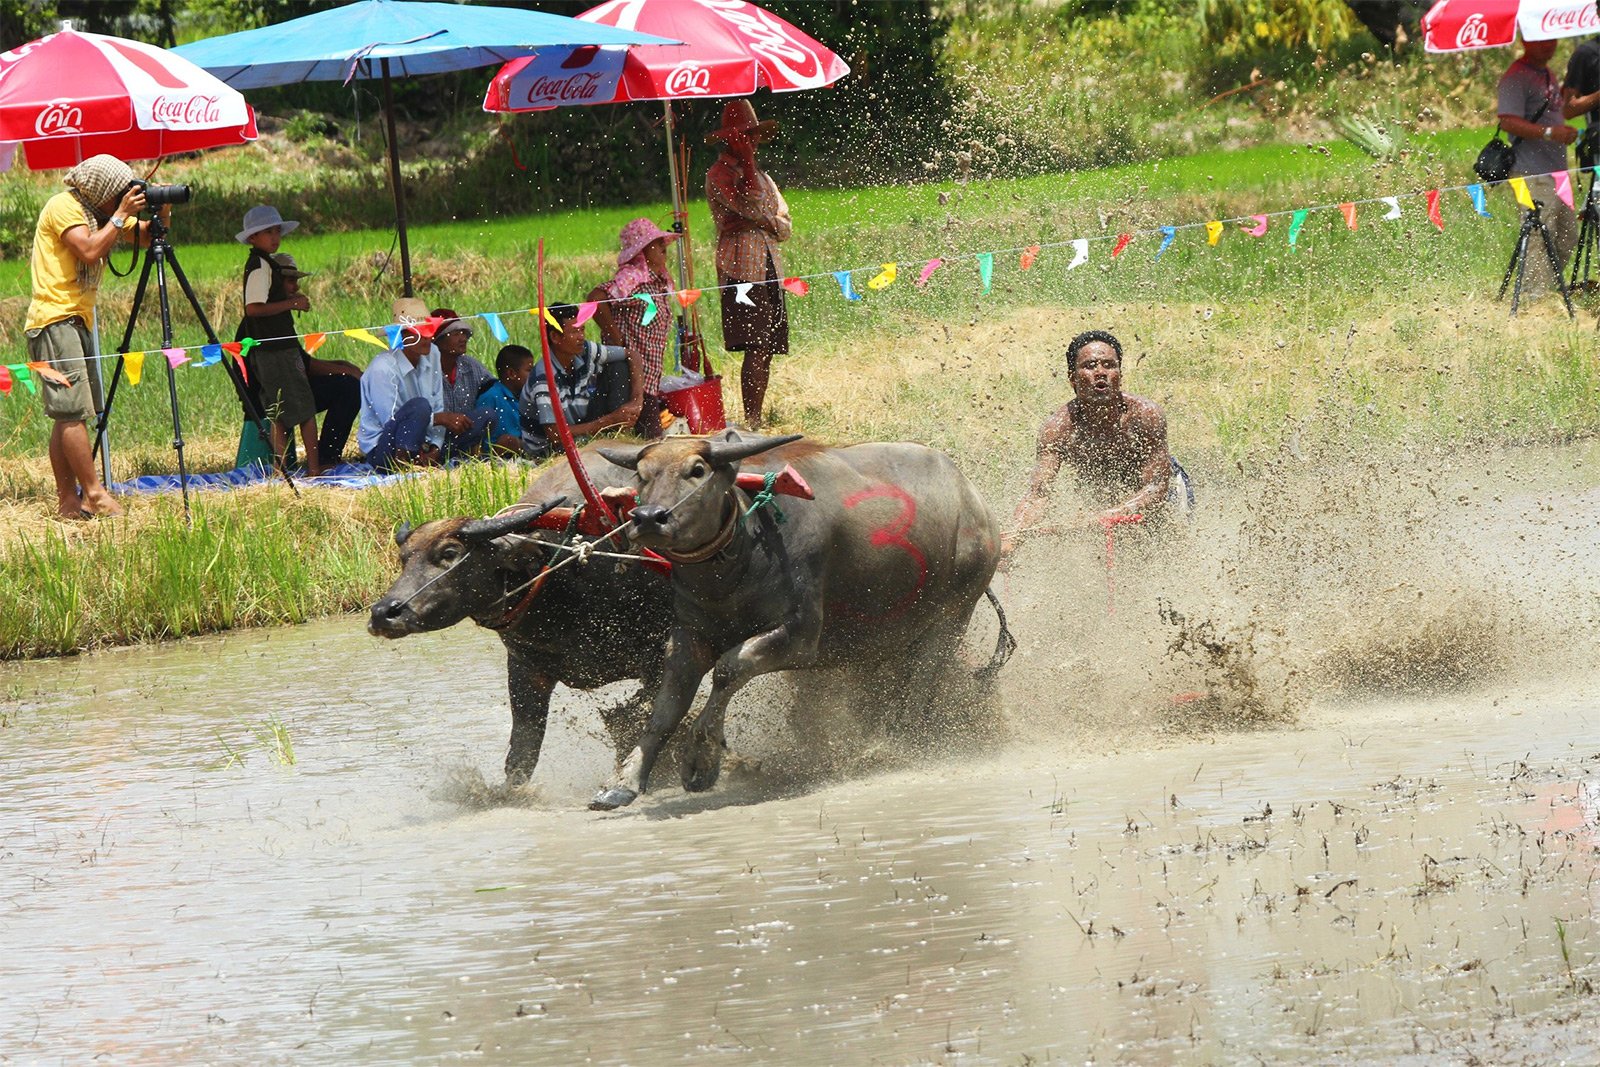 How to visit the Buffalo Race in Pattaya